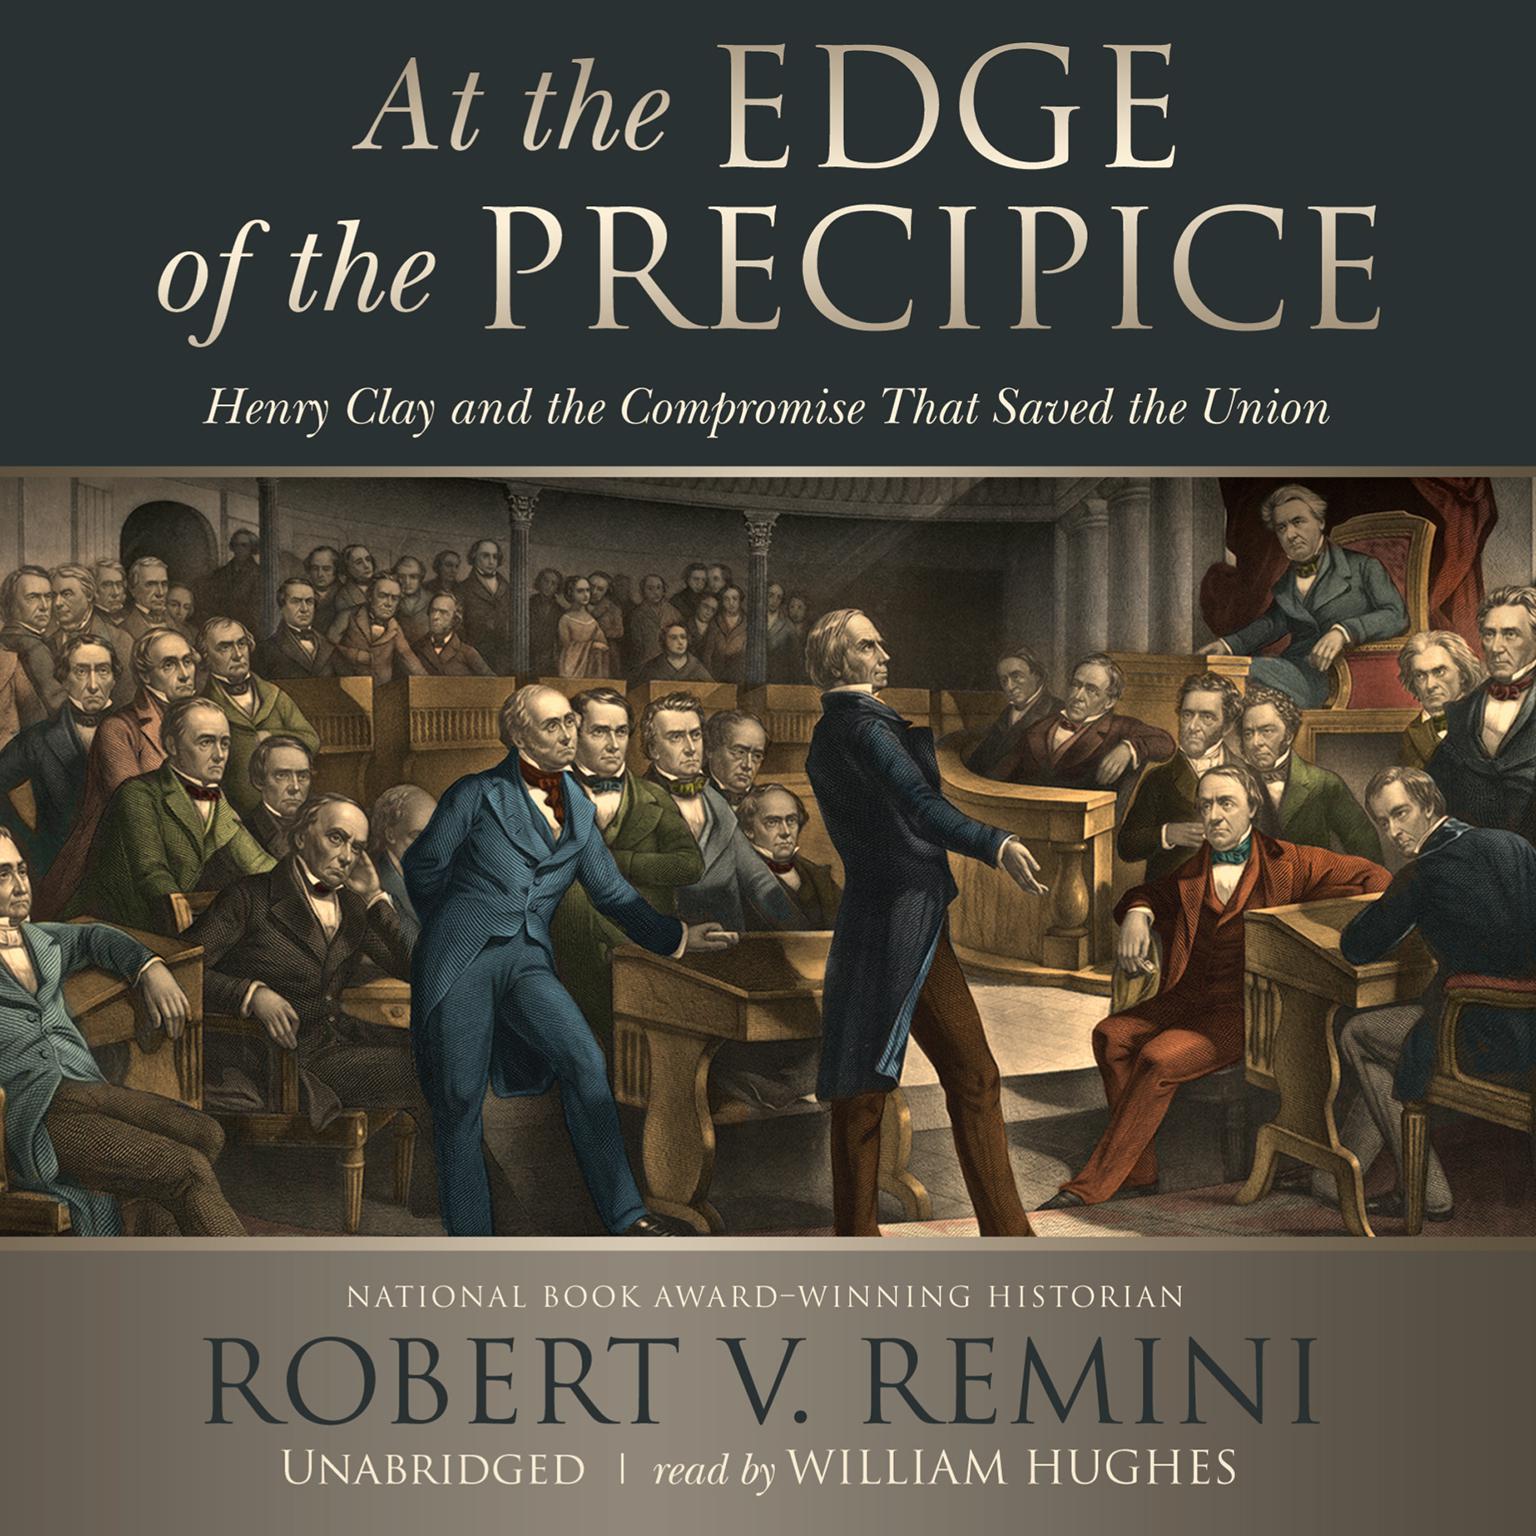 At the Edge of the Precipice: Henry Clay and the Compromise That Saved the Union Audiobook, by Robert V. Remini